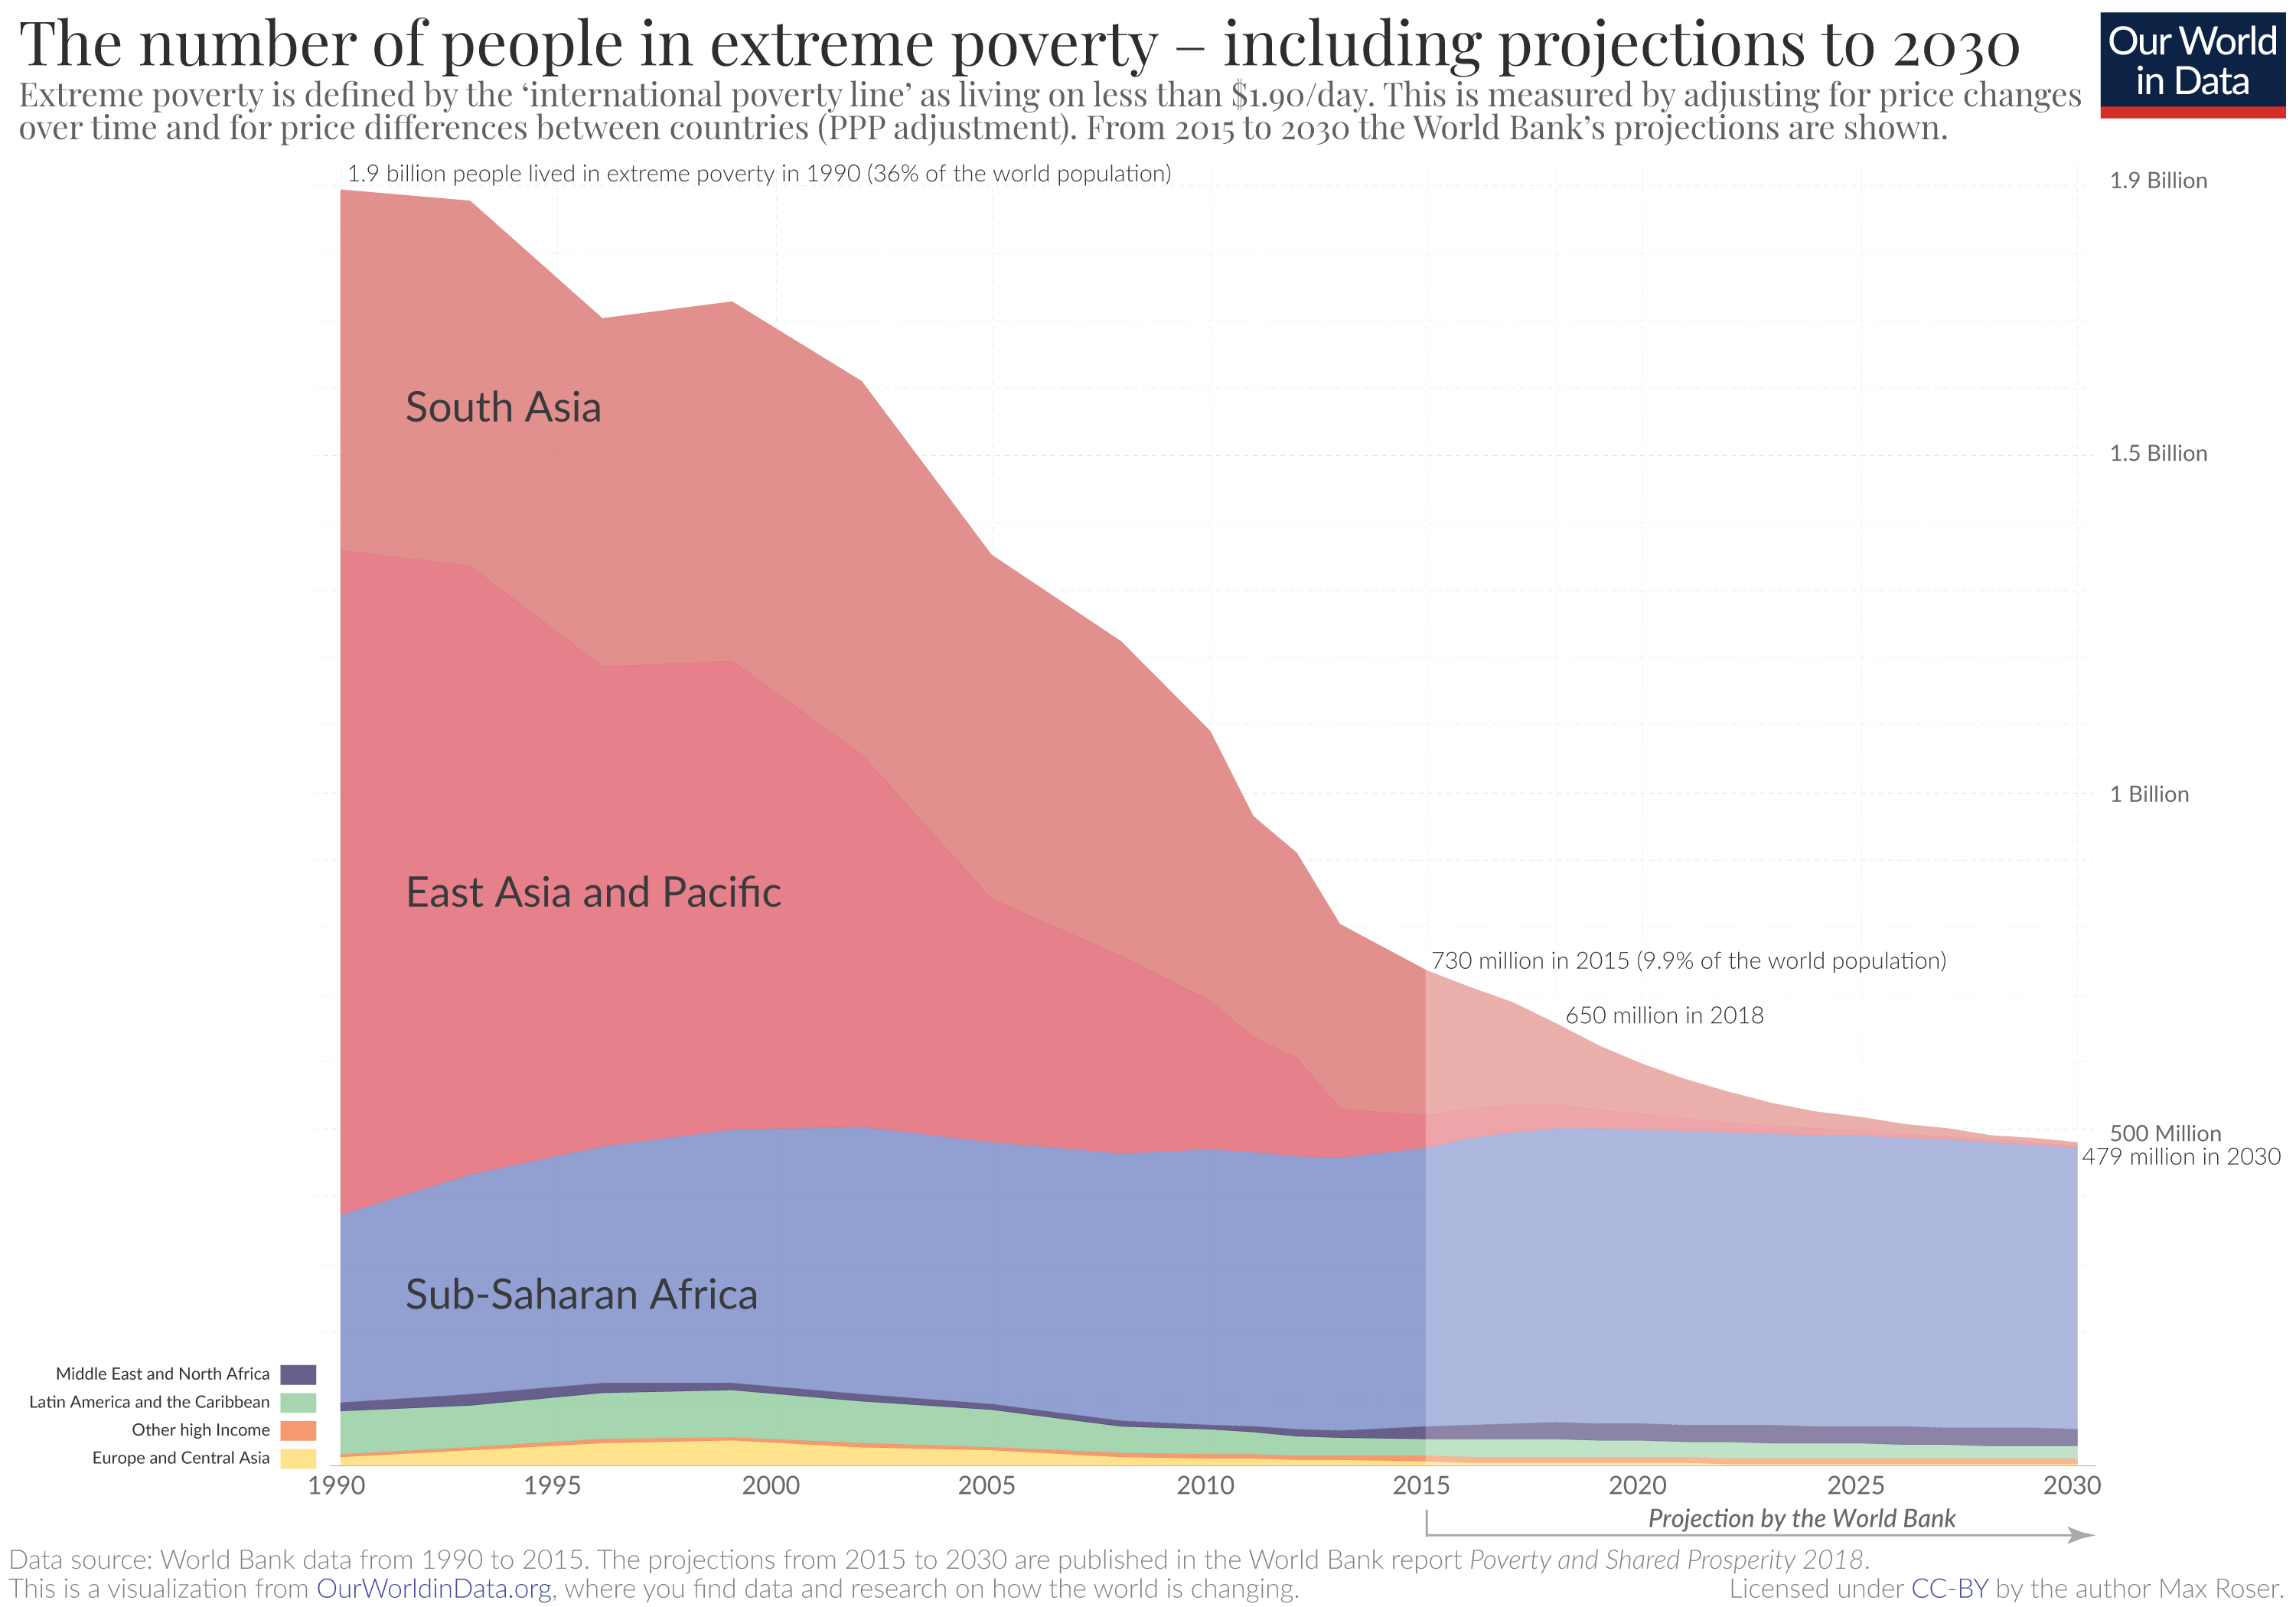 Extreme Poverty projection by the World Bank to 2030